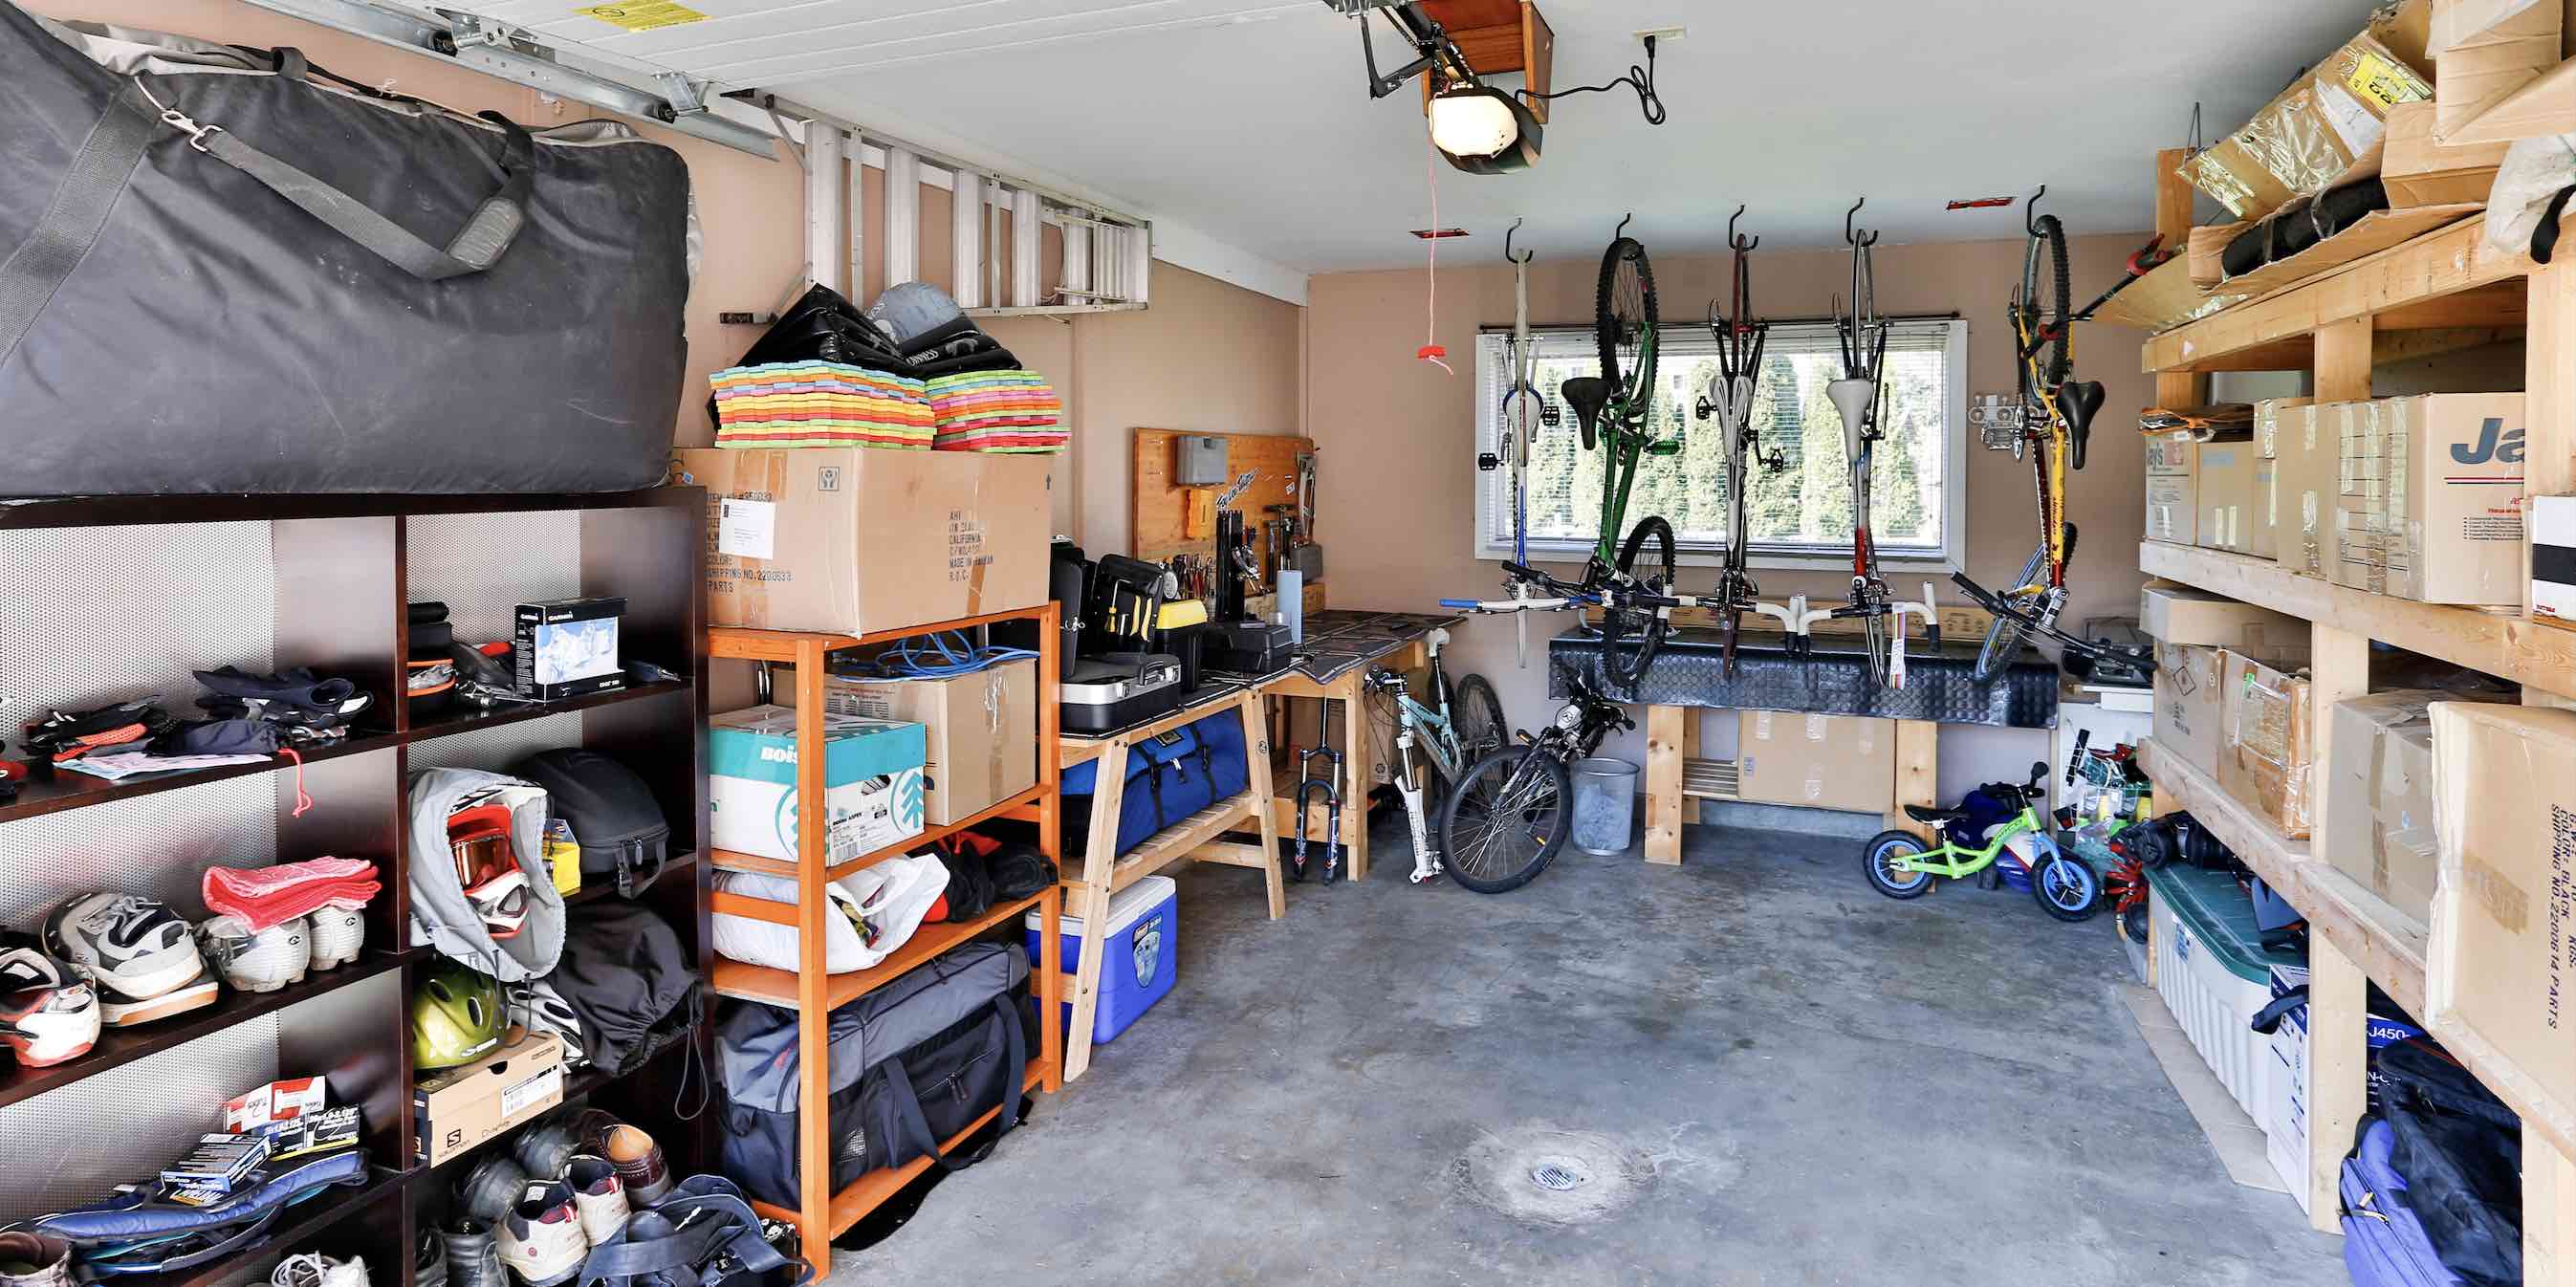 Picture of interior of a home's garage house to represent the sub-title is your garage cluttered?